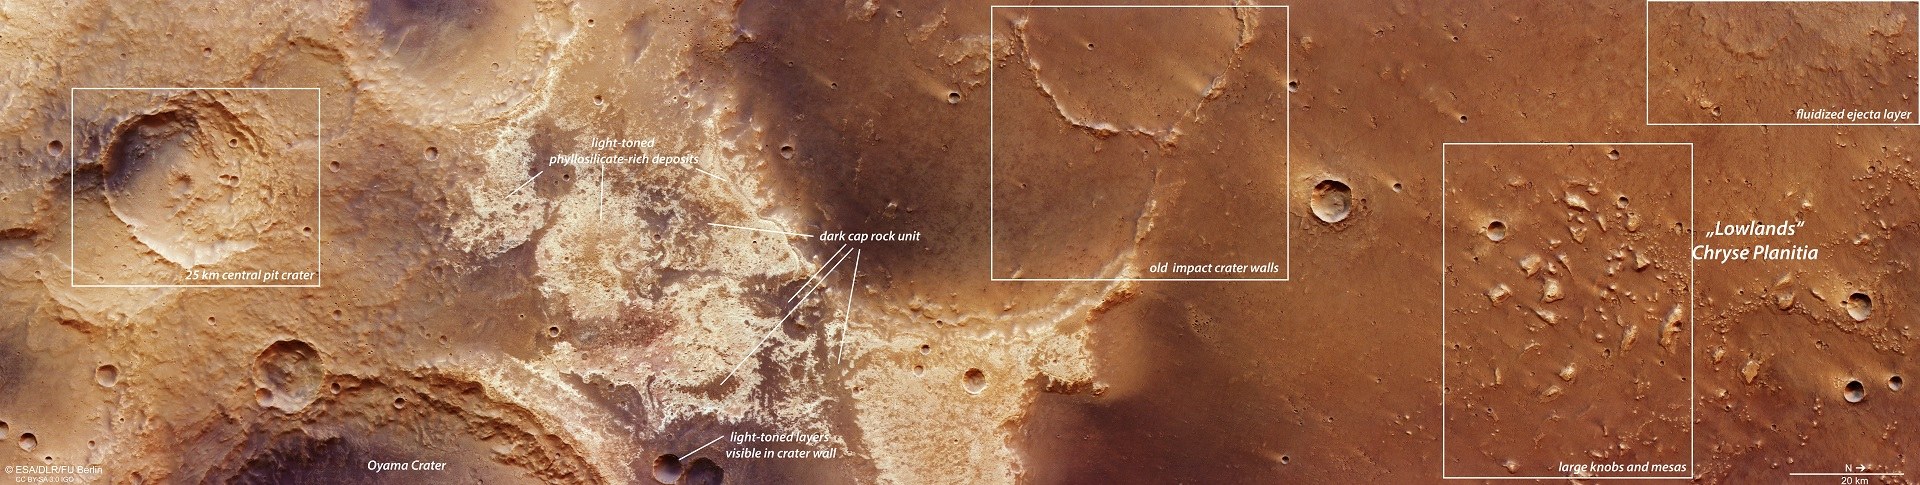 Geological structures in the outflow area of Mawrth Vallis